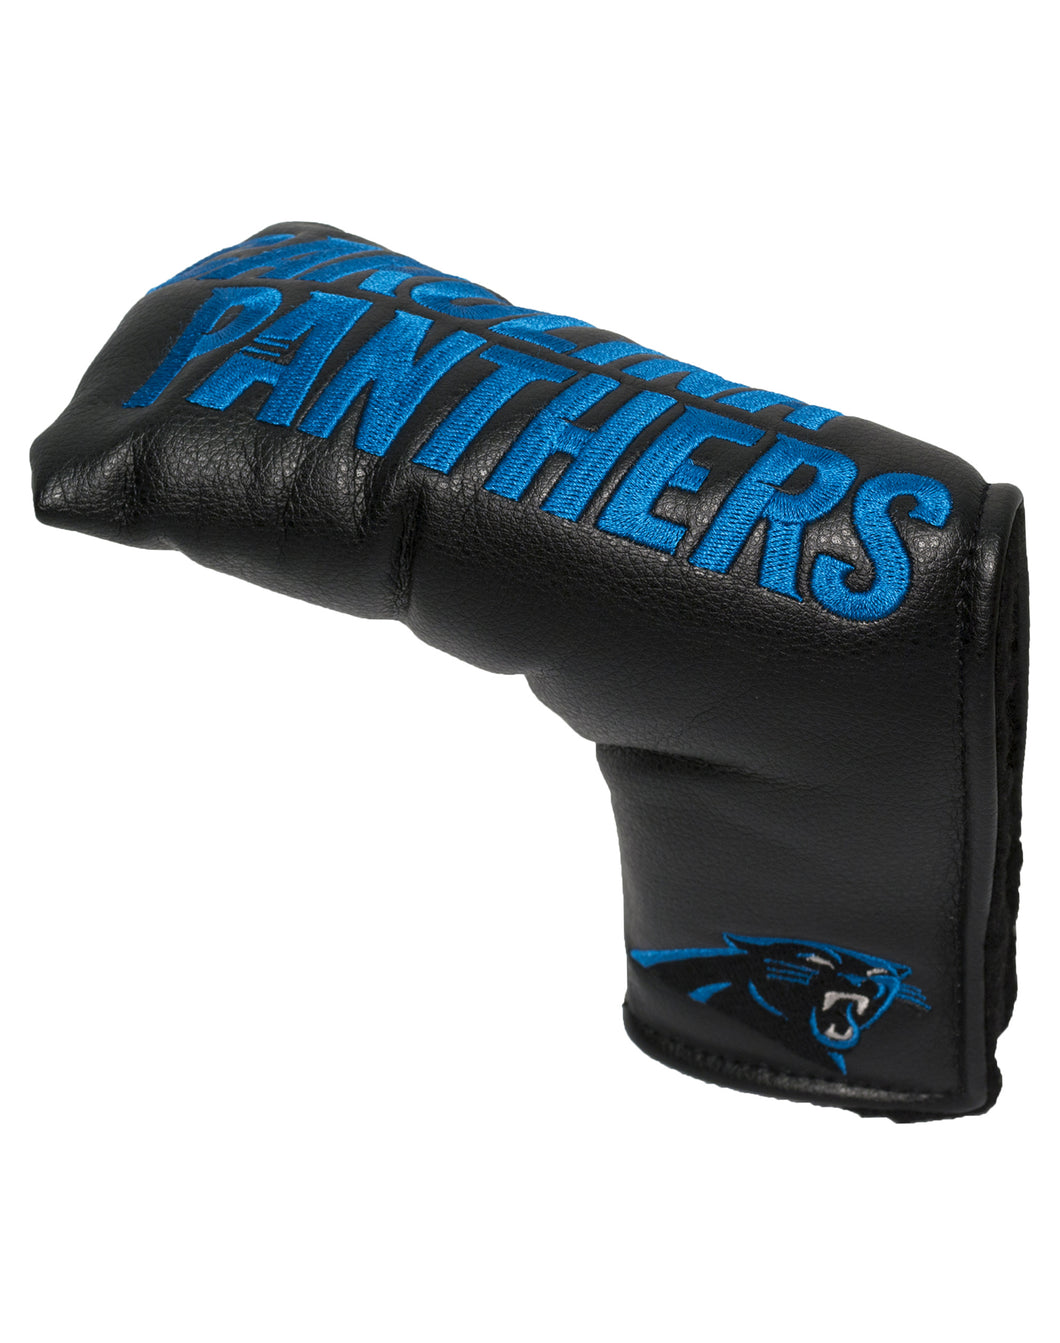 NFL Official Vintage Golf Blade Style Putter Headcover. Carolina Panthers